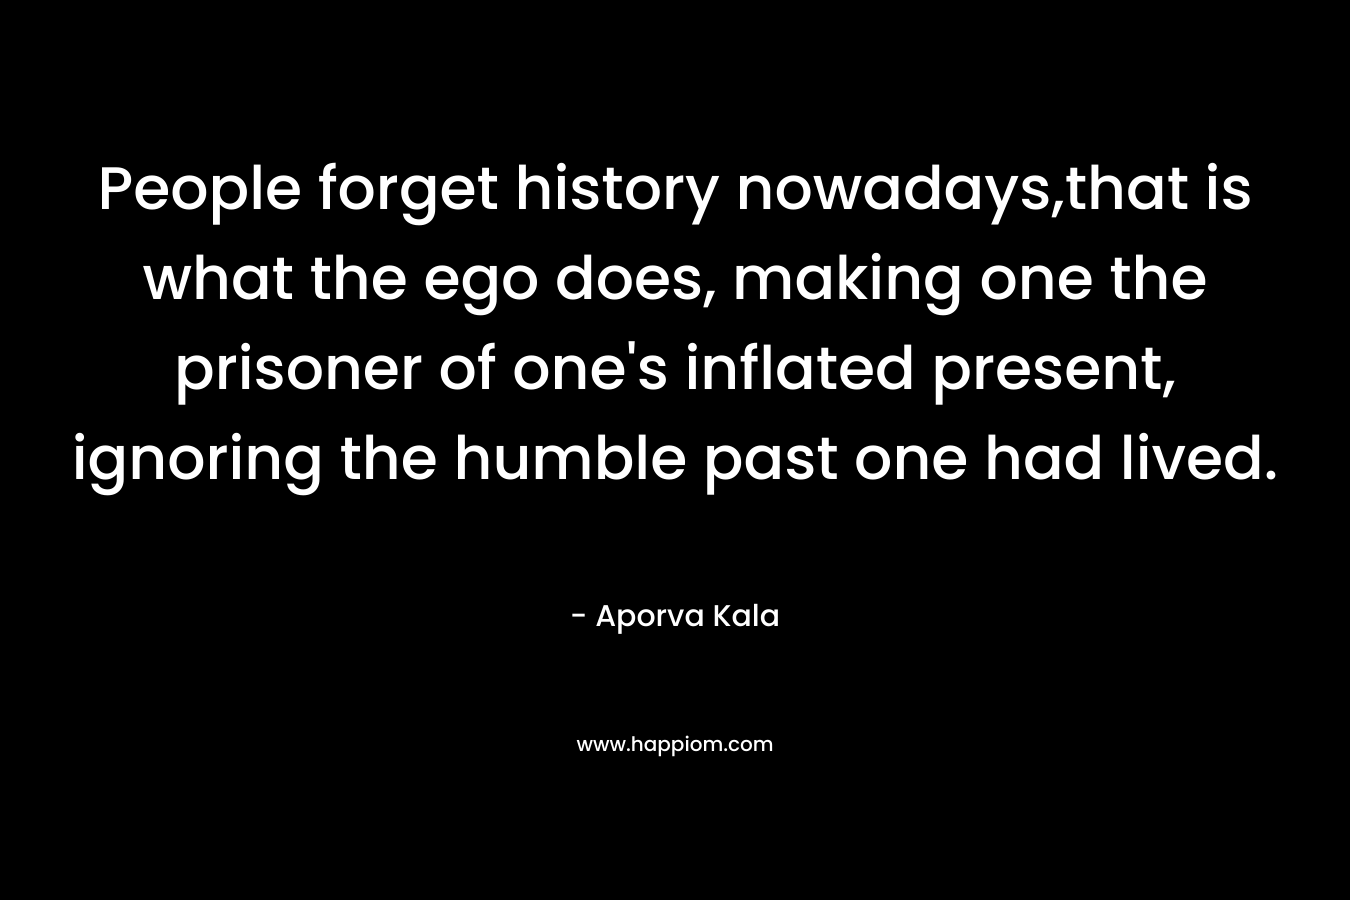 People forget history nowadays,that is what the ego does, making one the prisoner of one’s inflated present, ignoring the humble past one had lived. – Aporva Kala